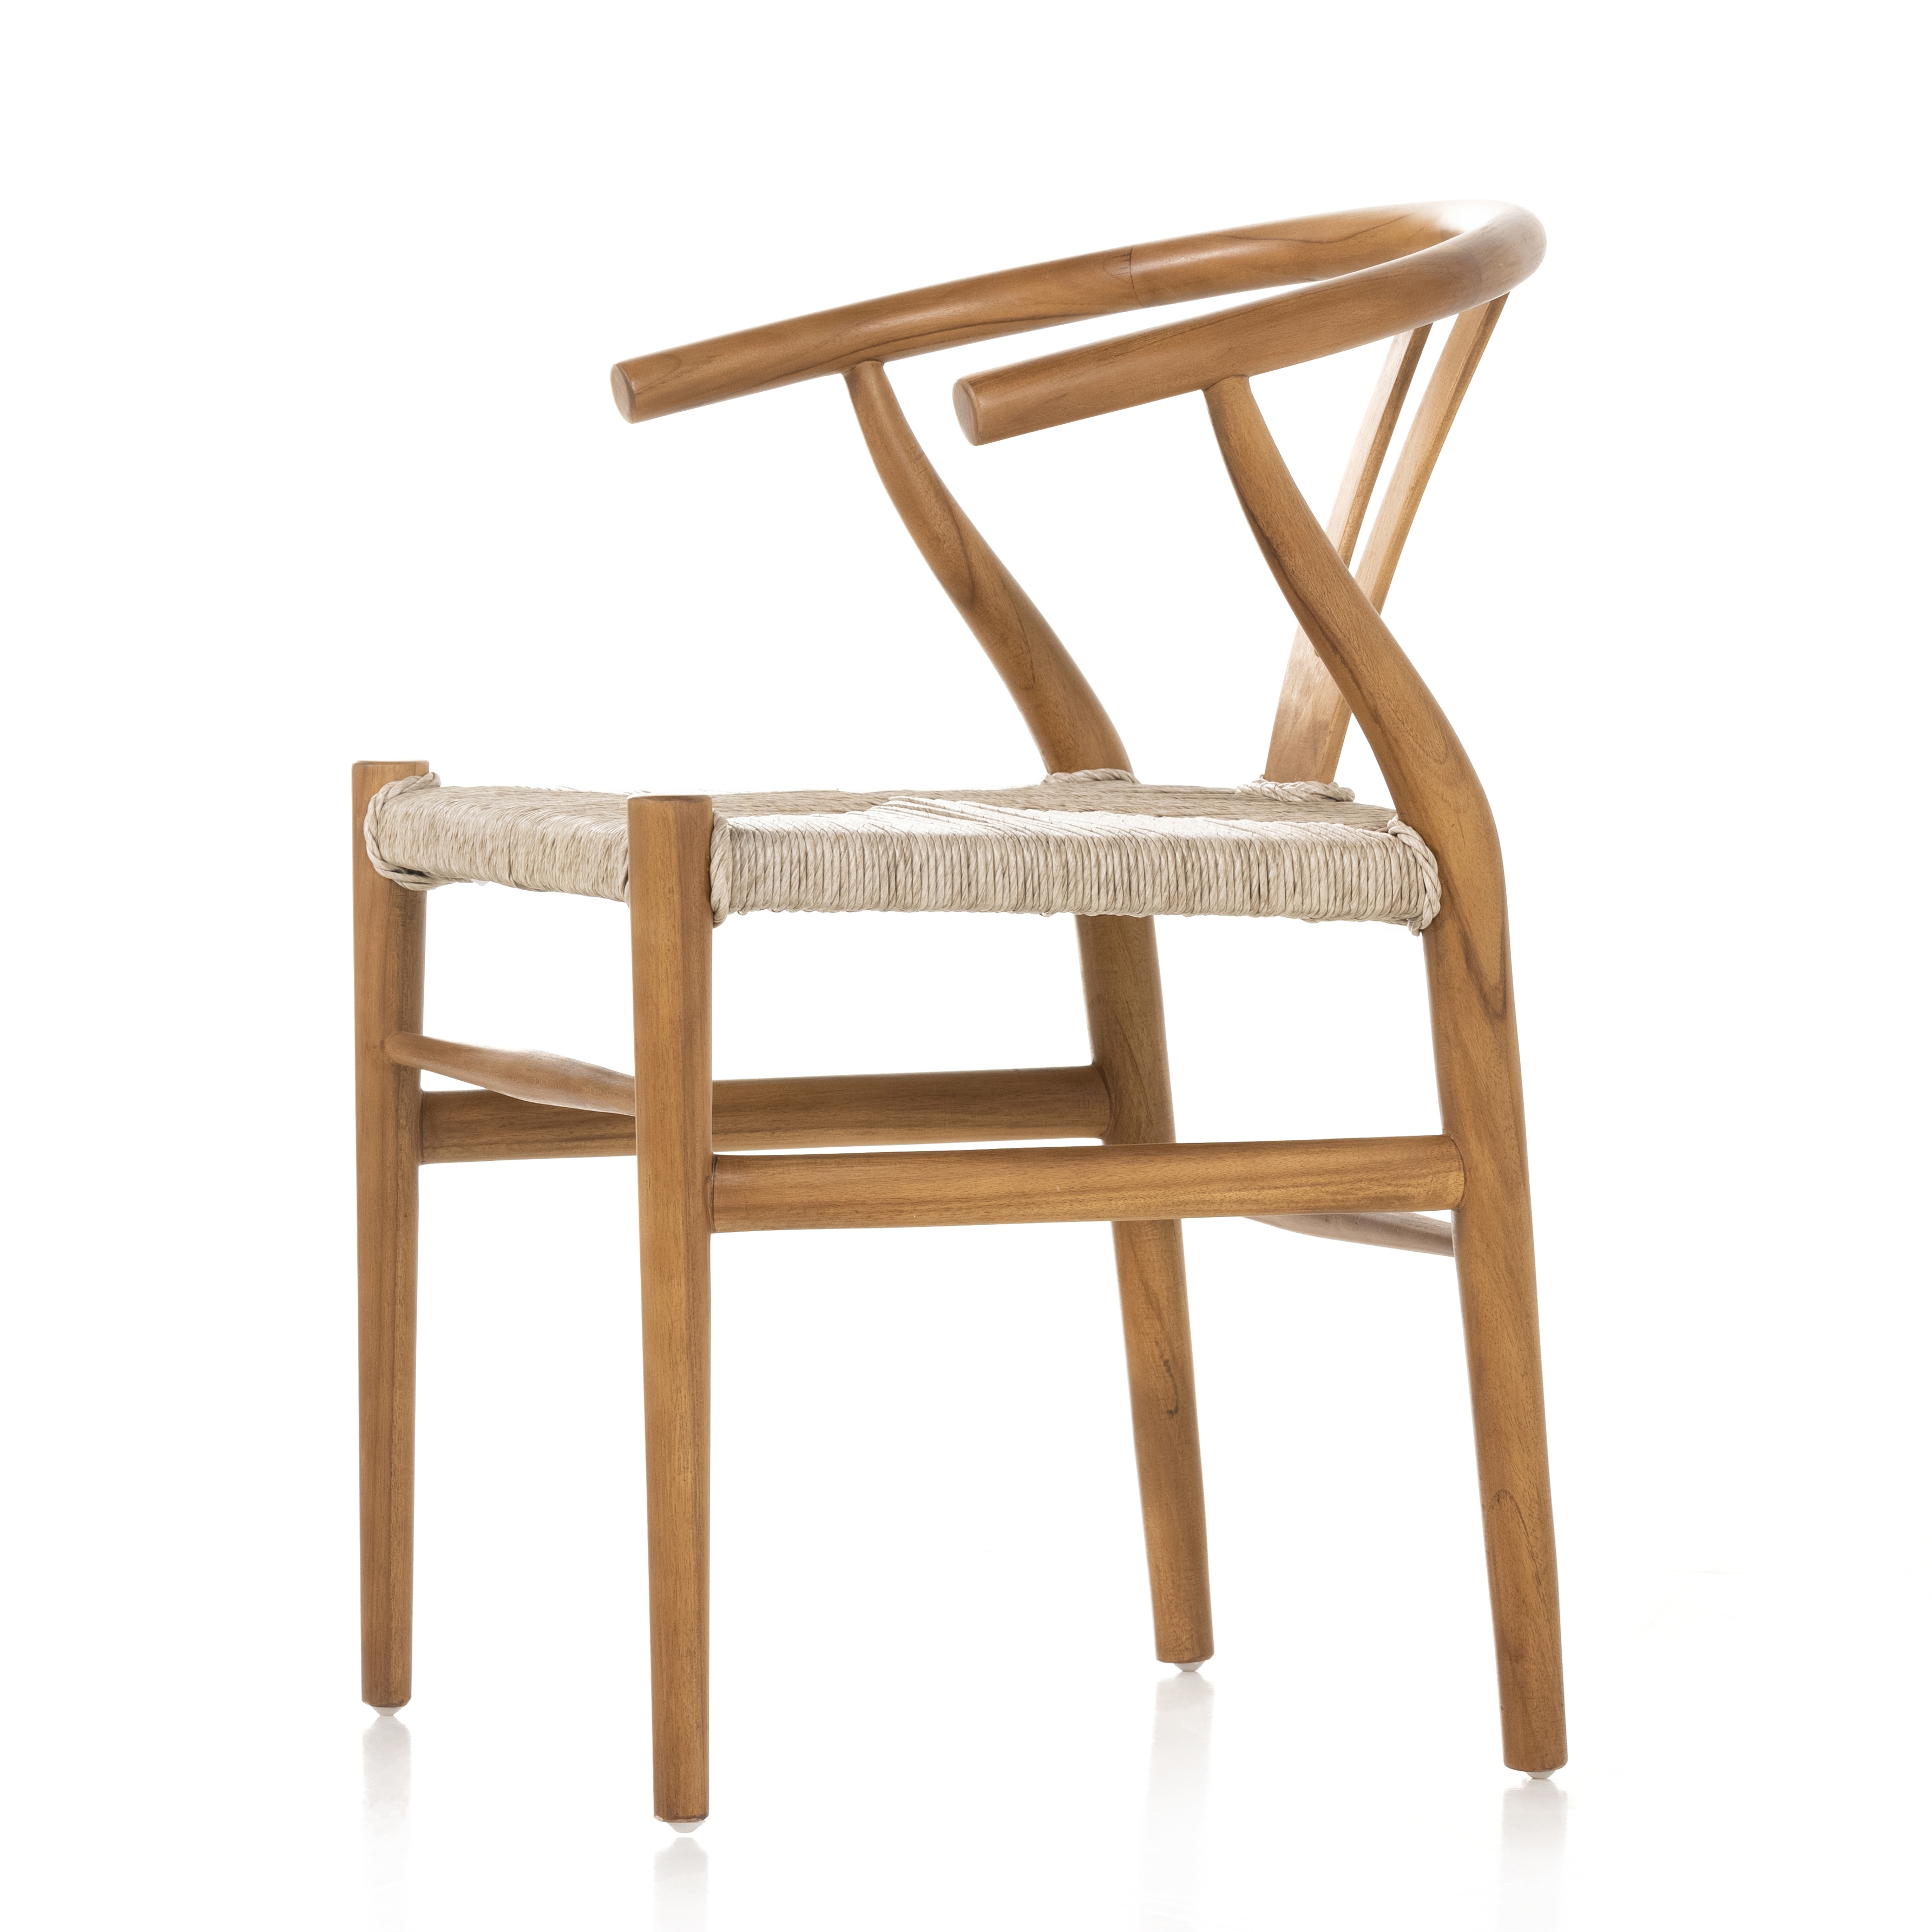 Muestra Dining Chair-Natural - Image 1